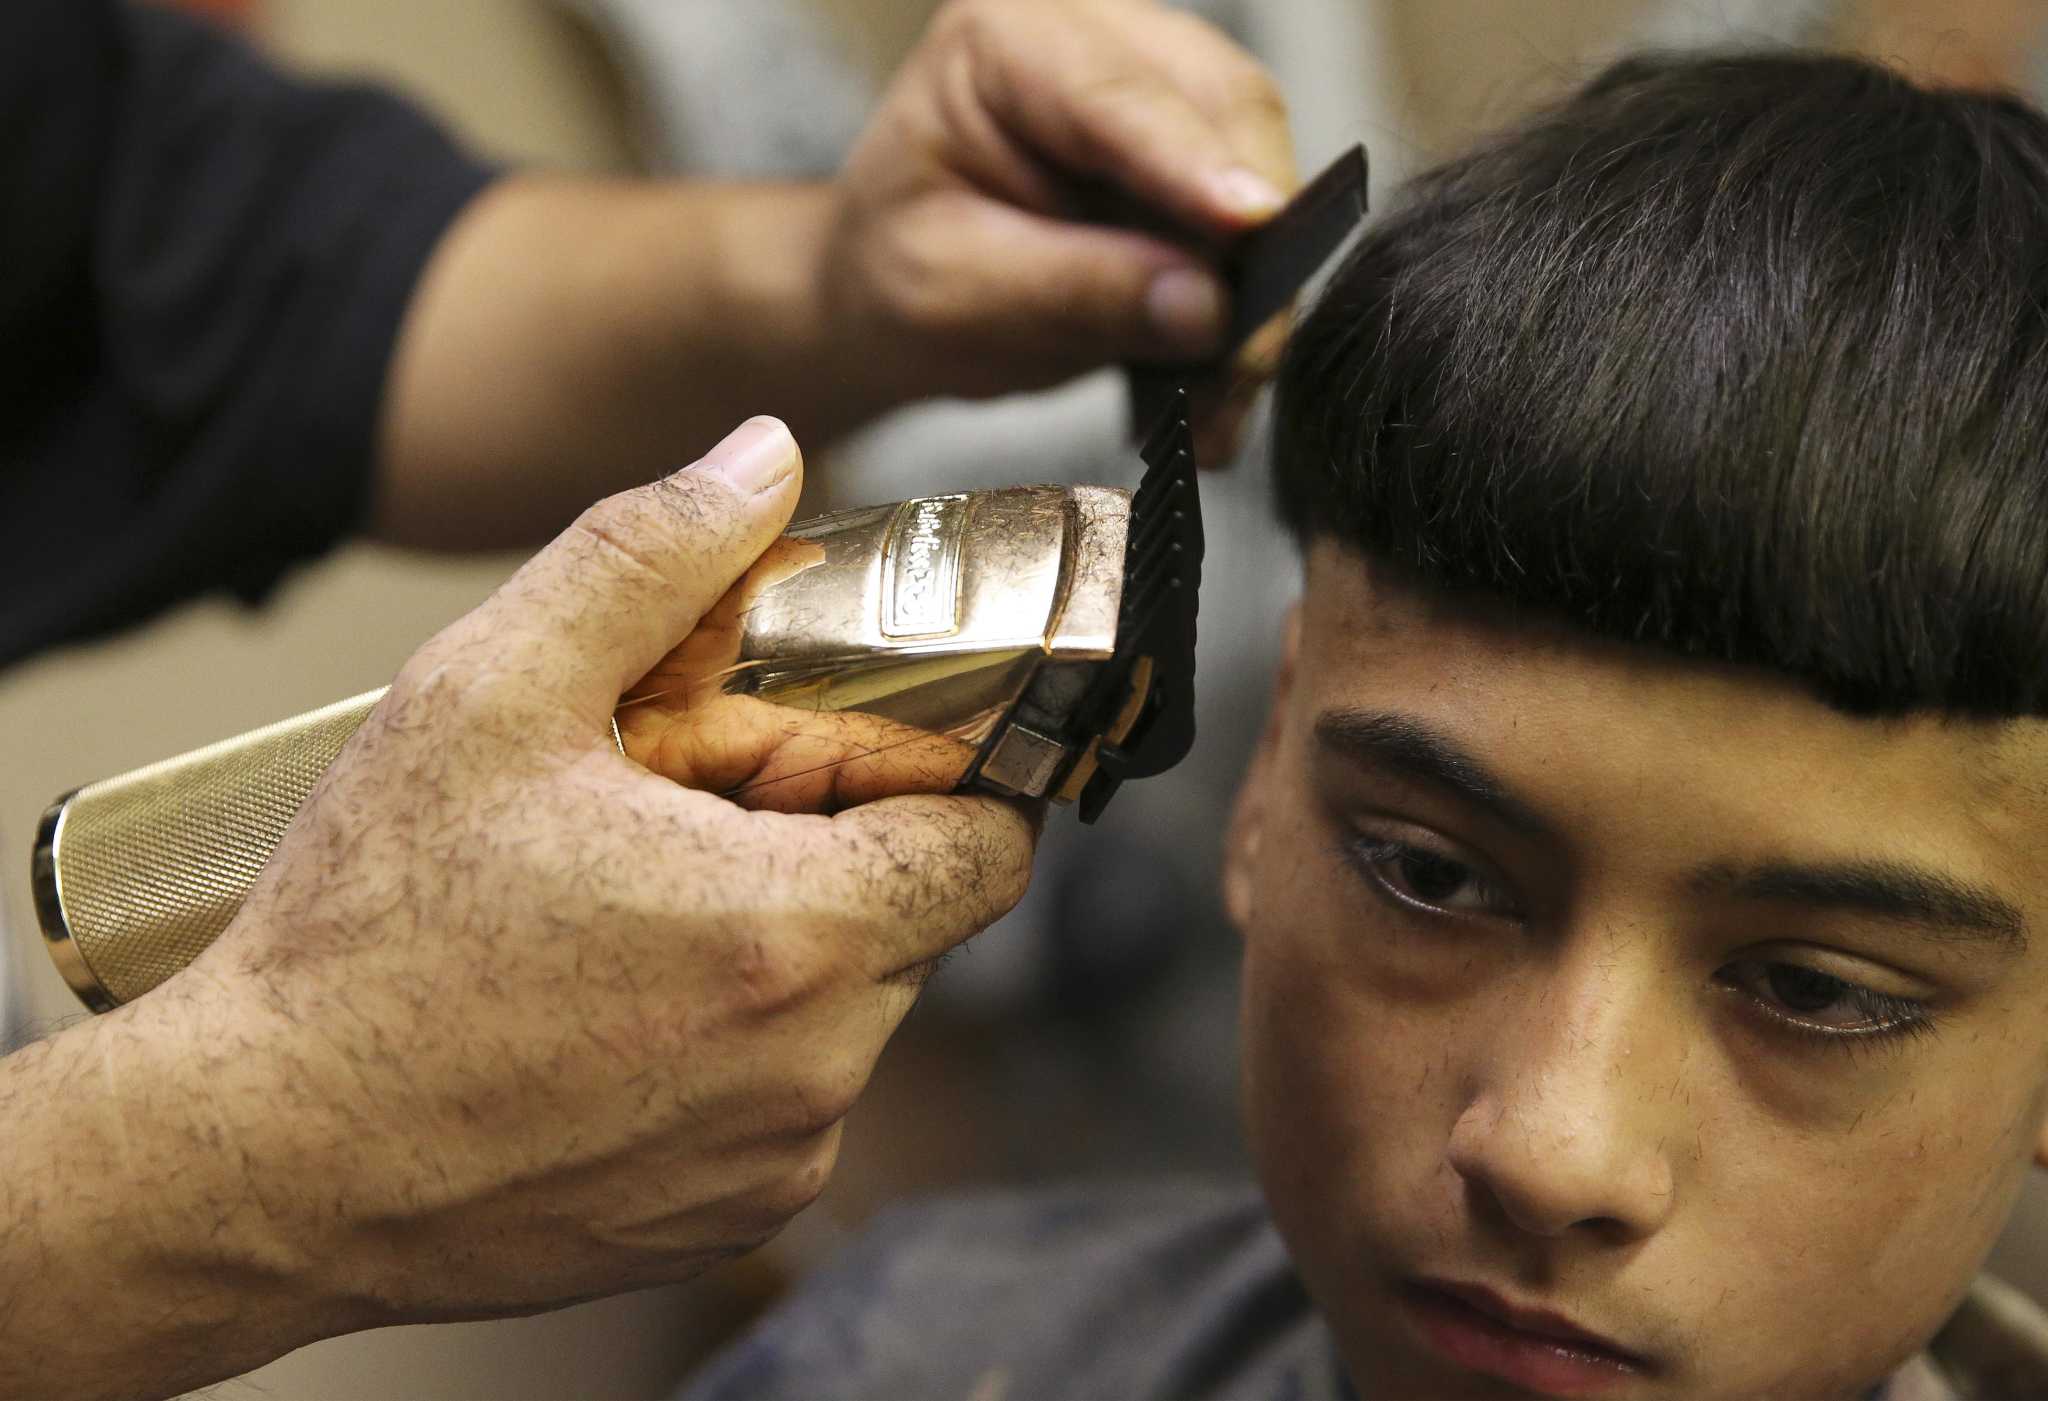 The 'Edgar' haircut San Antonio makes fun of might be rooted in